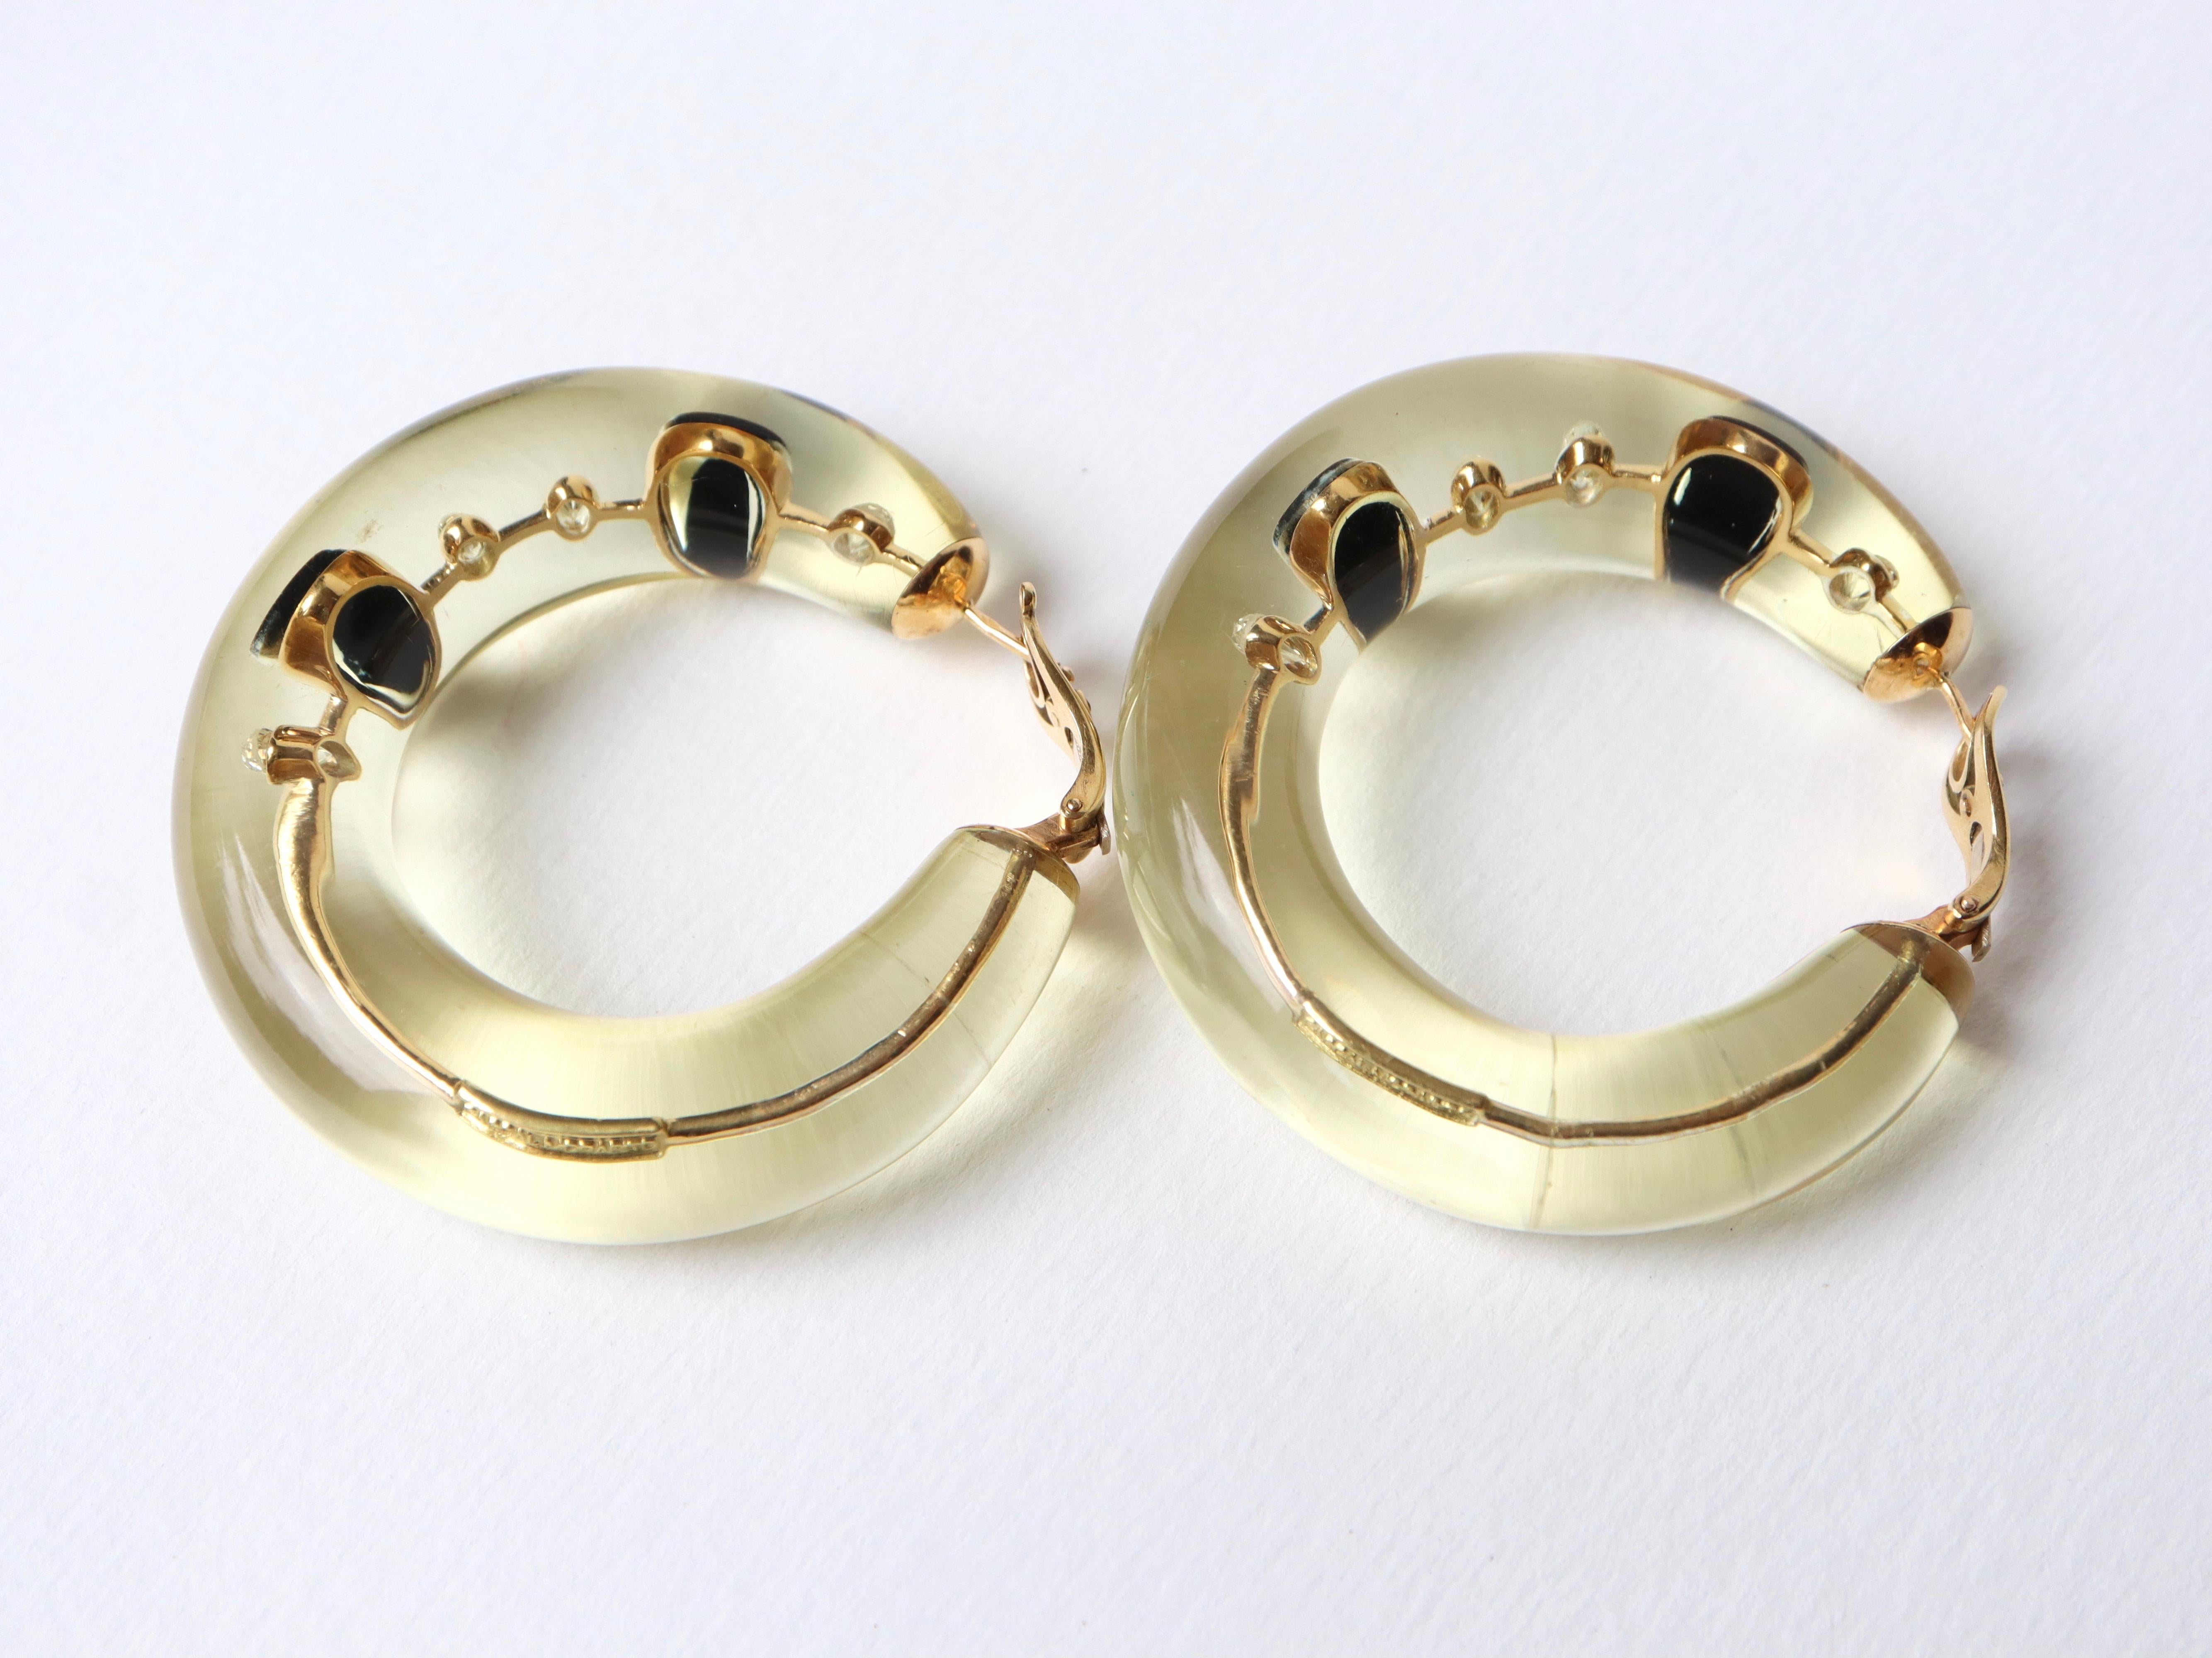 Brilliant Cut Pascal Morabito Hoop Earrings, 18 Karat Yellow Gold, Diamonds and Onyx in Resin For Sale